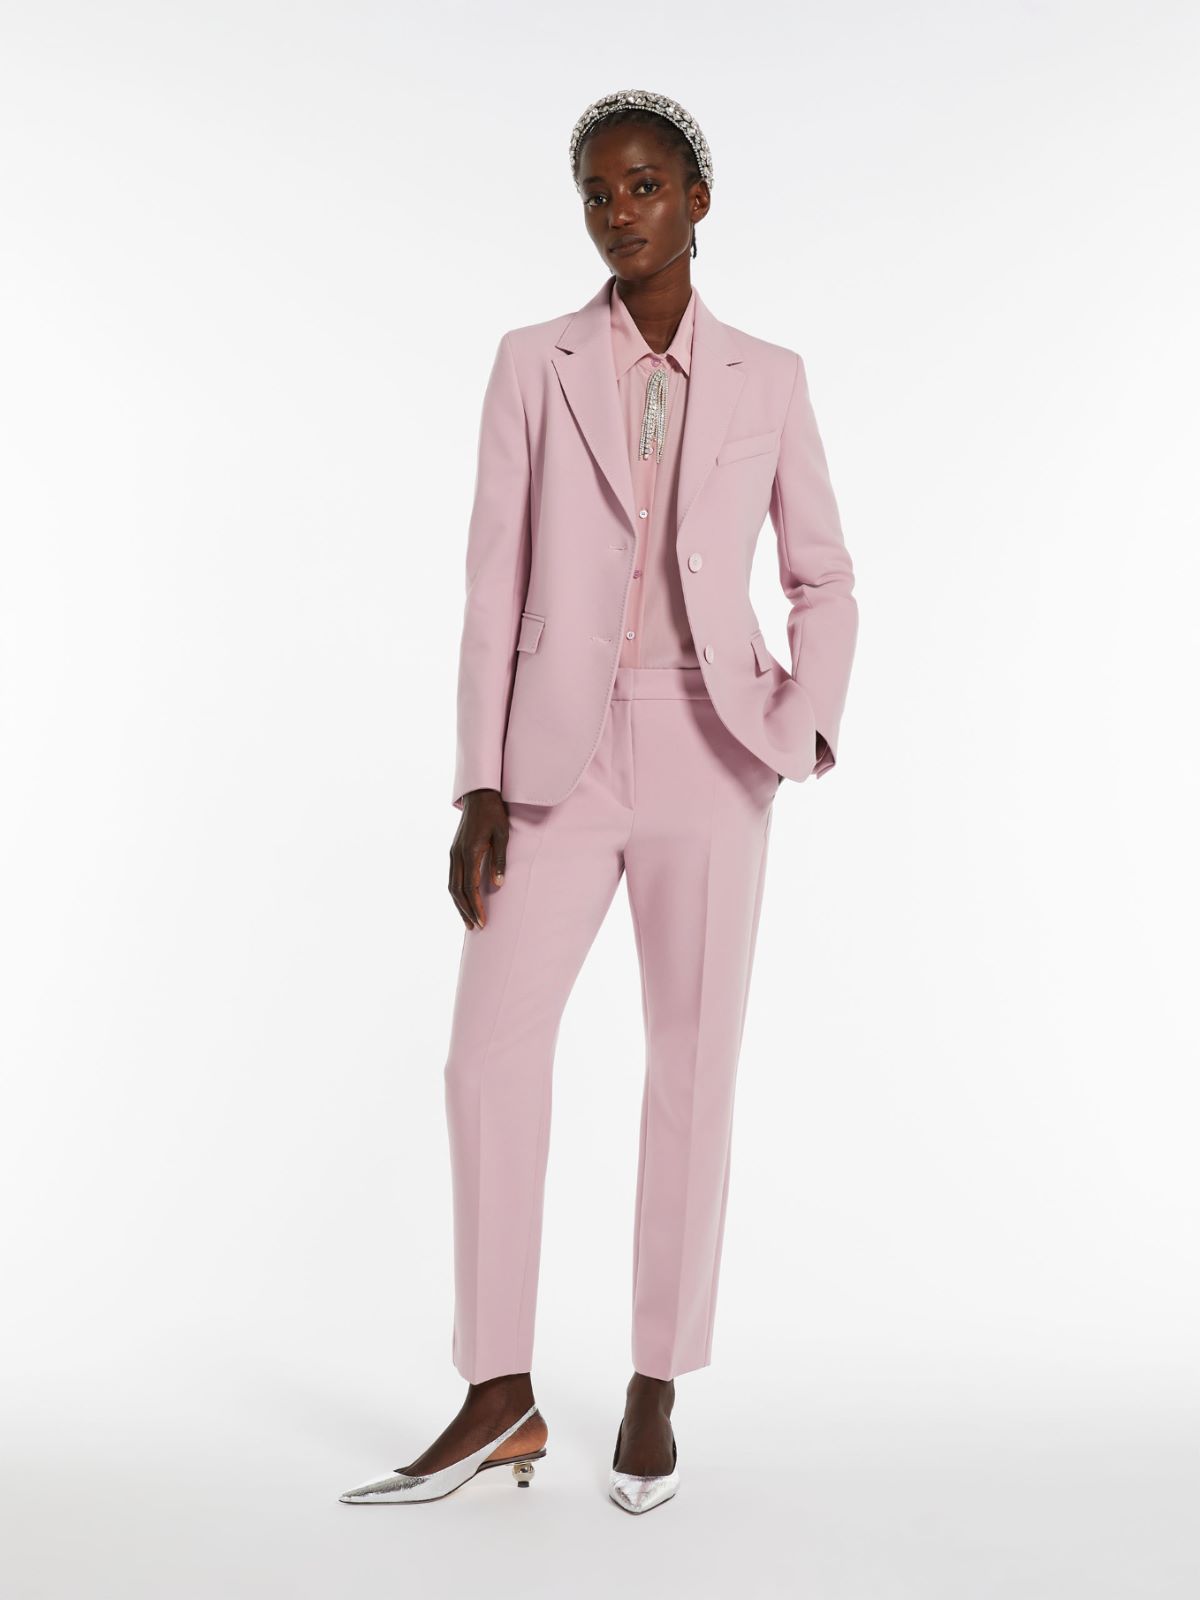 pink dress trousers